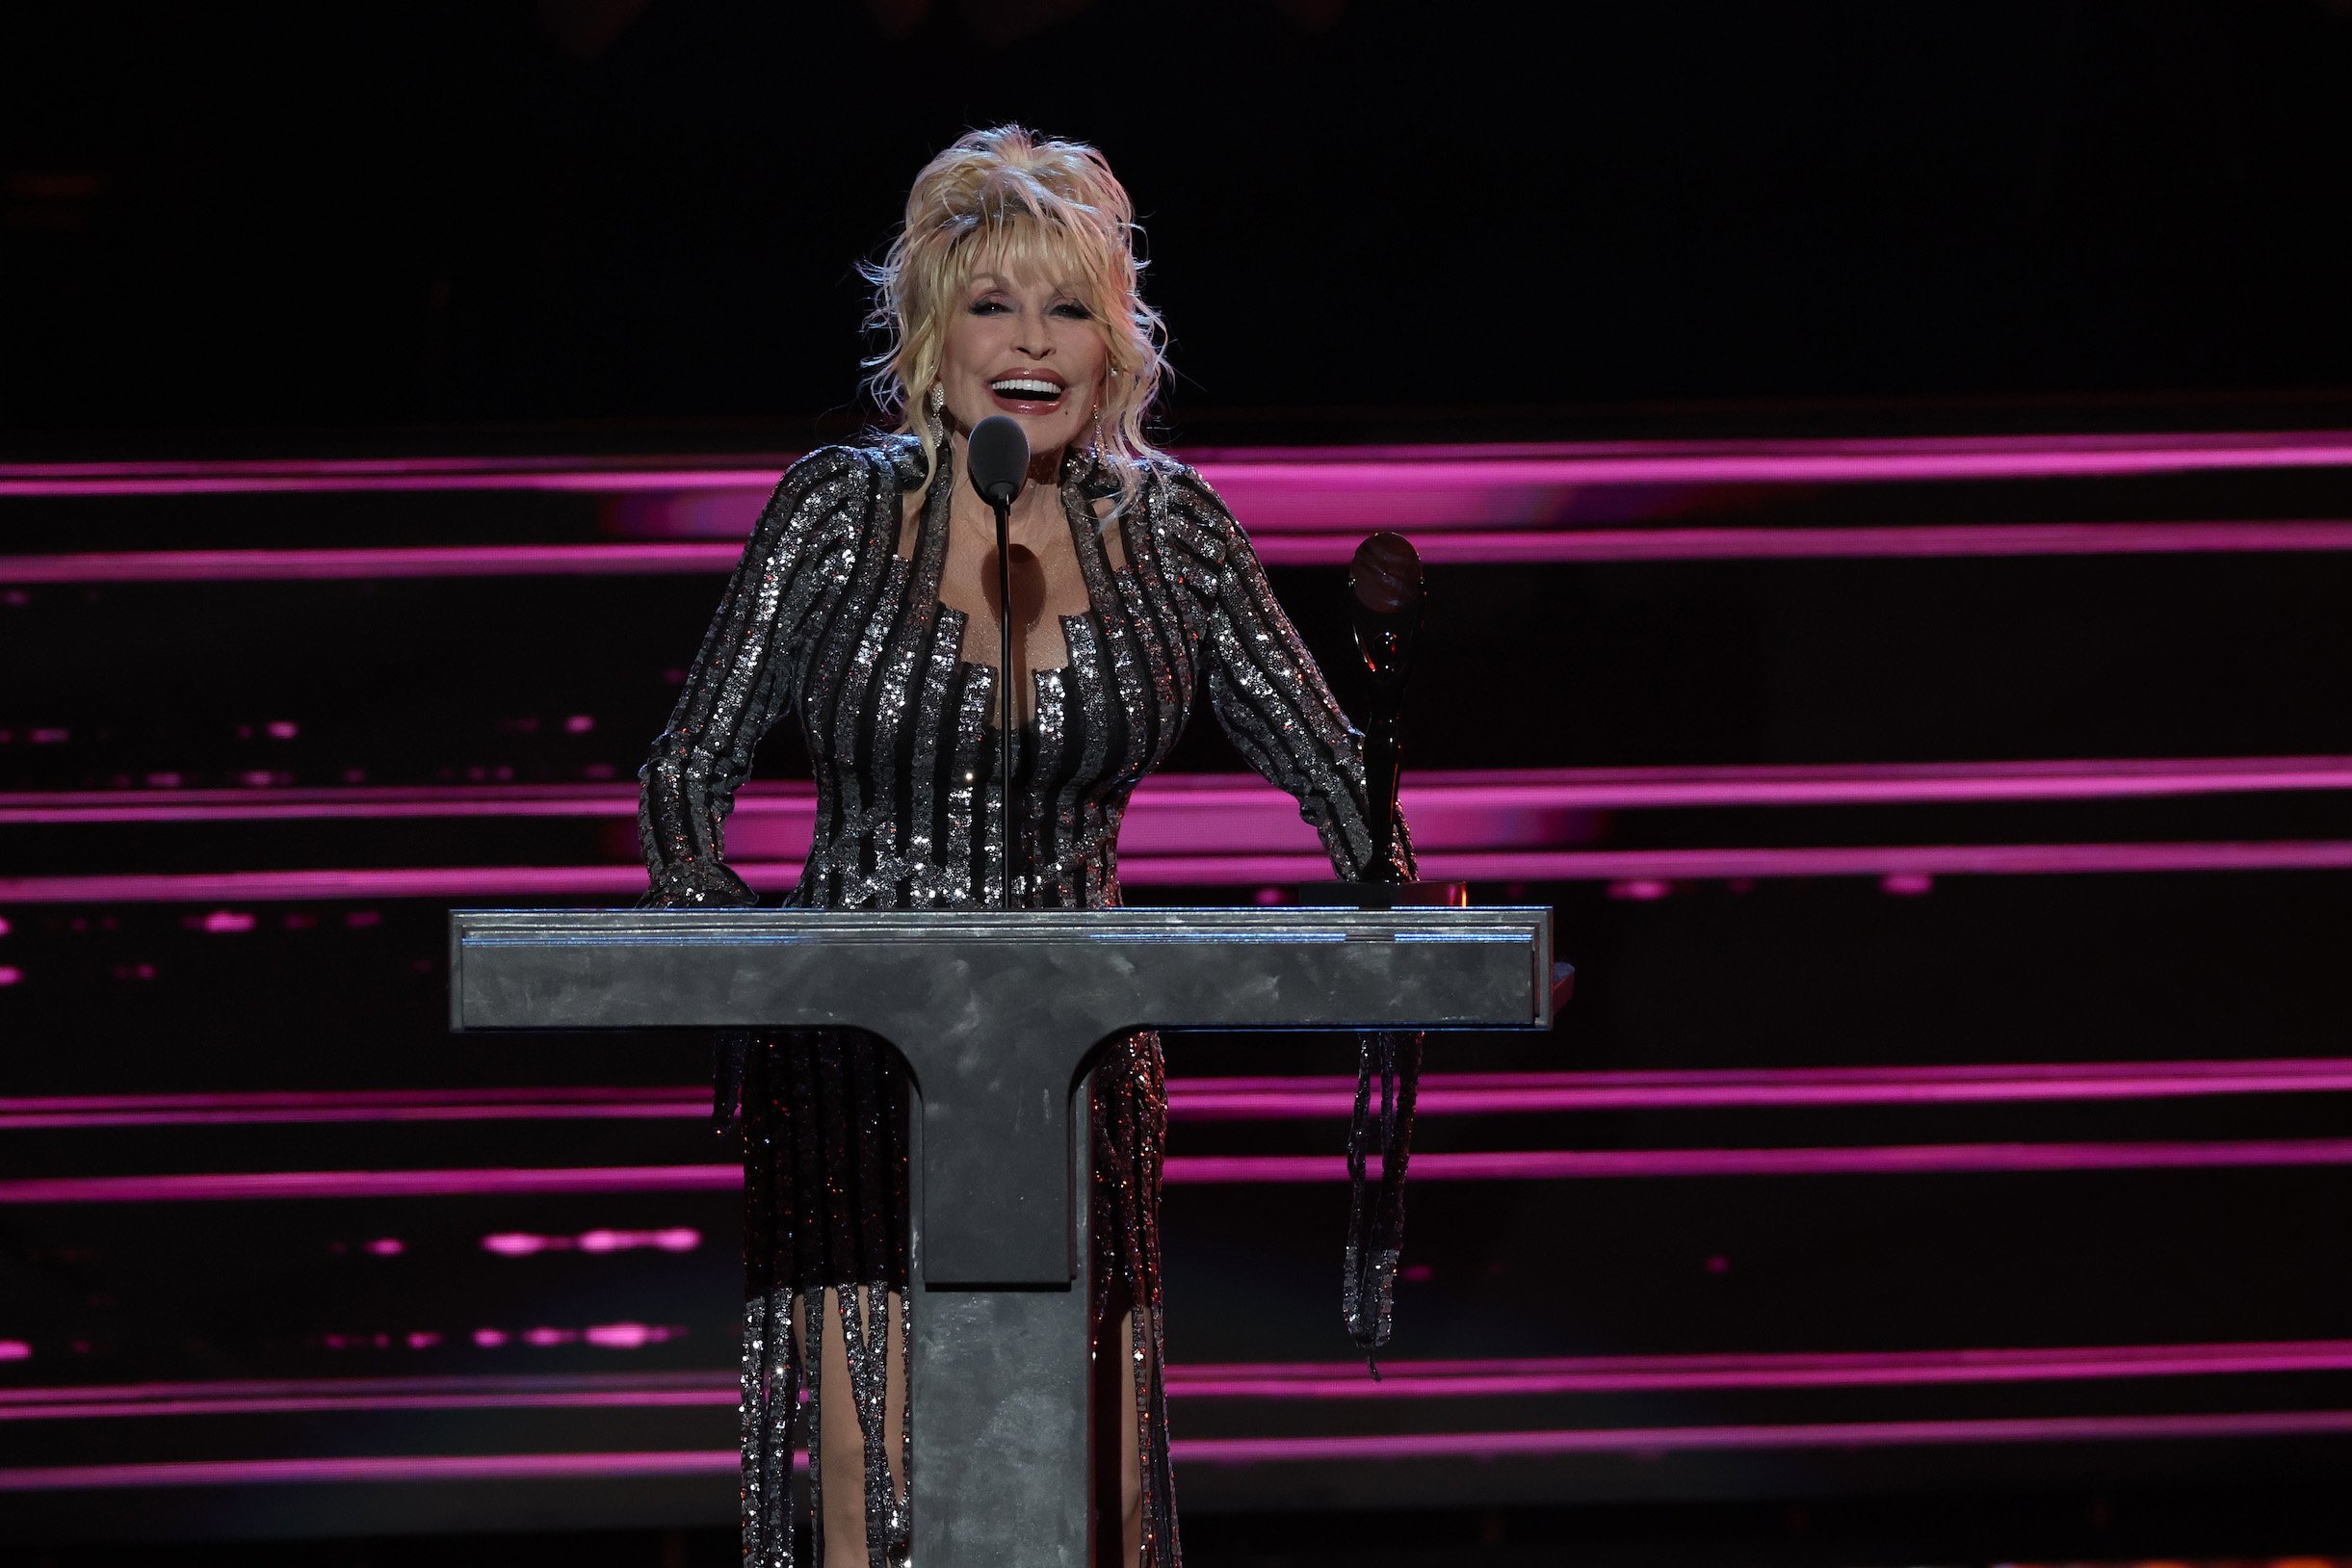 Dolly Parton speaks onstage at the 37th Annual Rock and Roll Hall of Fame Induction Ceremony in Los Angeles, California